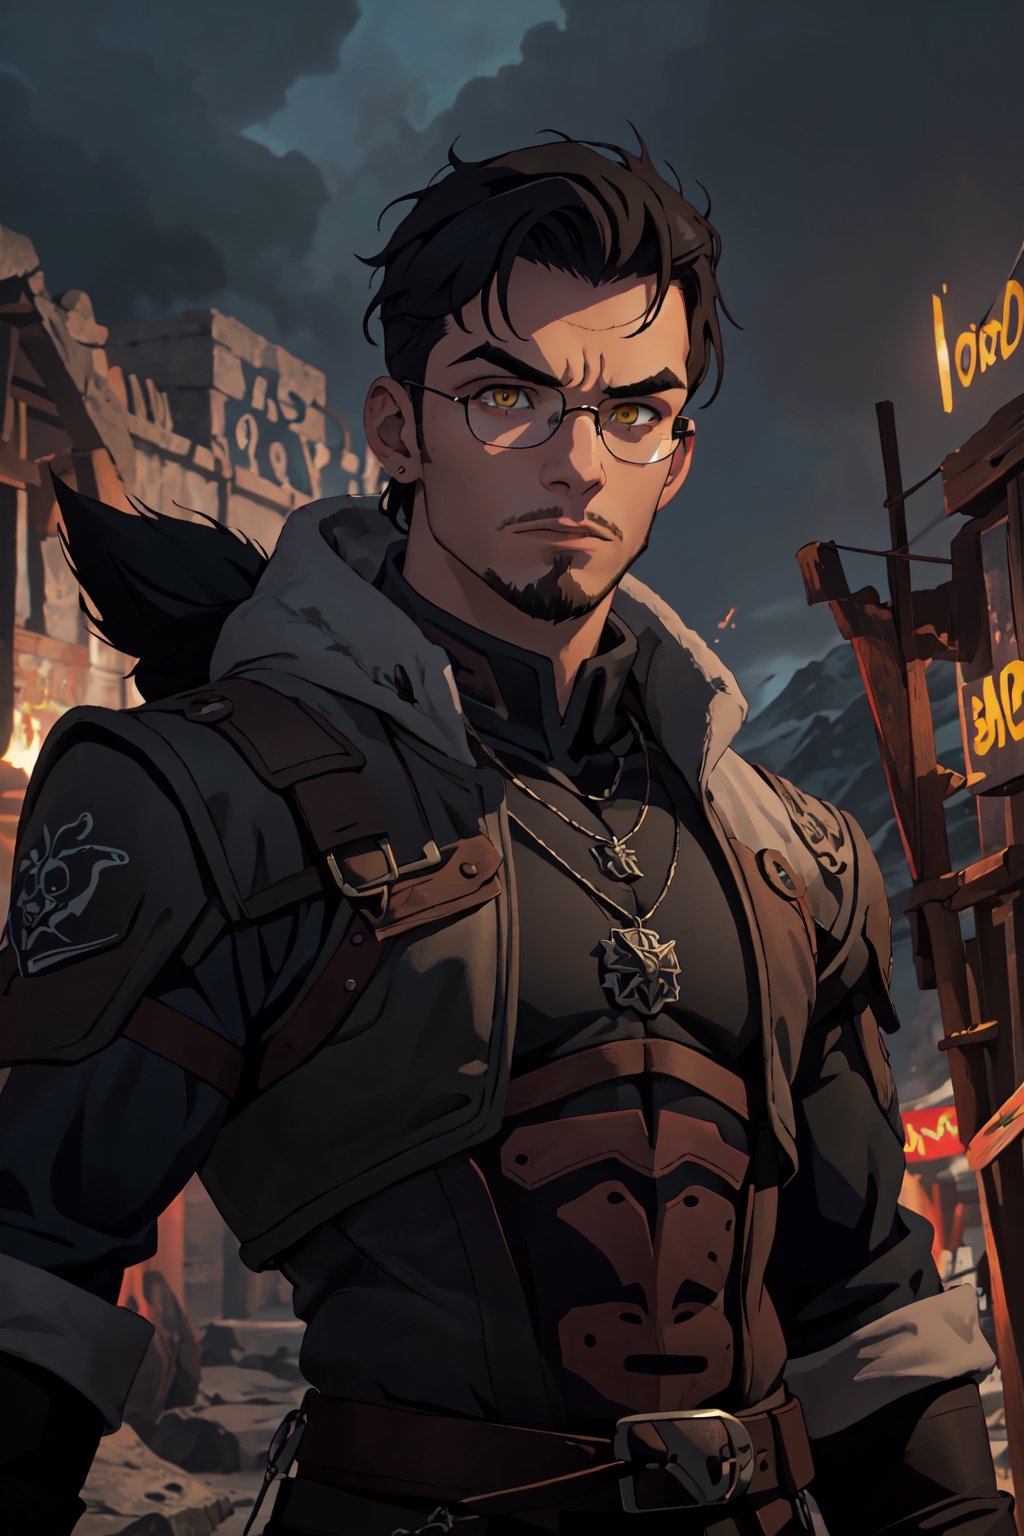 ((masterpiece)), ((1boy)), young man 23 years old, short black hair, ((small thick eyebrows)), old but cool glasses, clothes of the character Gerald de Ridea, metal necklace of a wolf, body thin but masculine, warrior facial expression, apocalyptic fantasy landscape, science fiction, cinematic blur, dynamic lights.,witcher, (iris of the yellow eyes) 